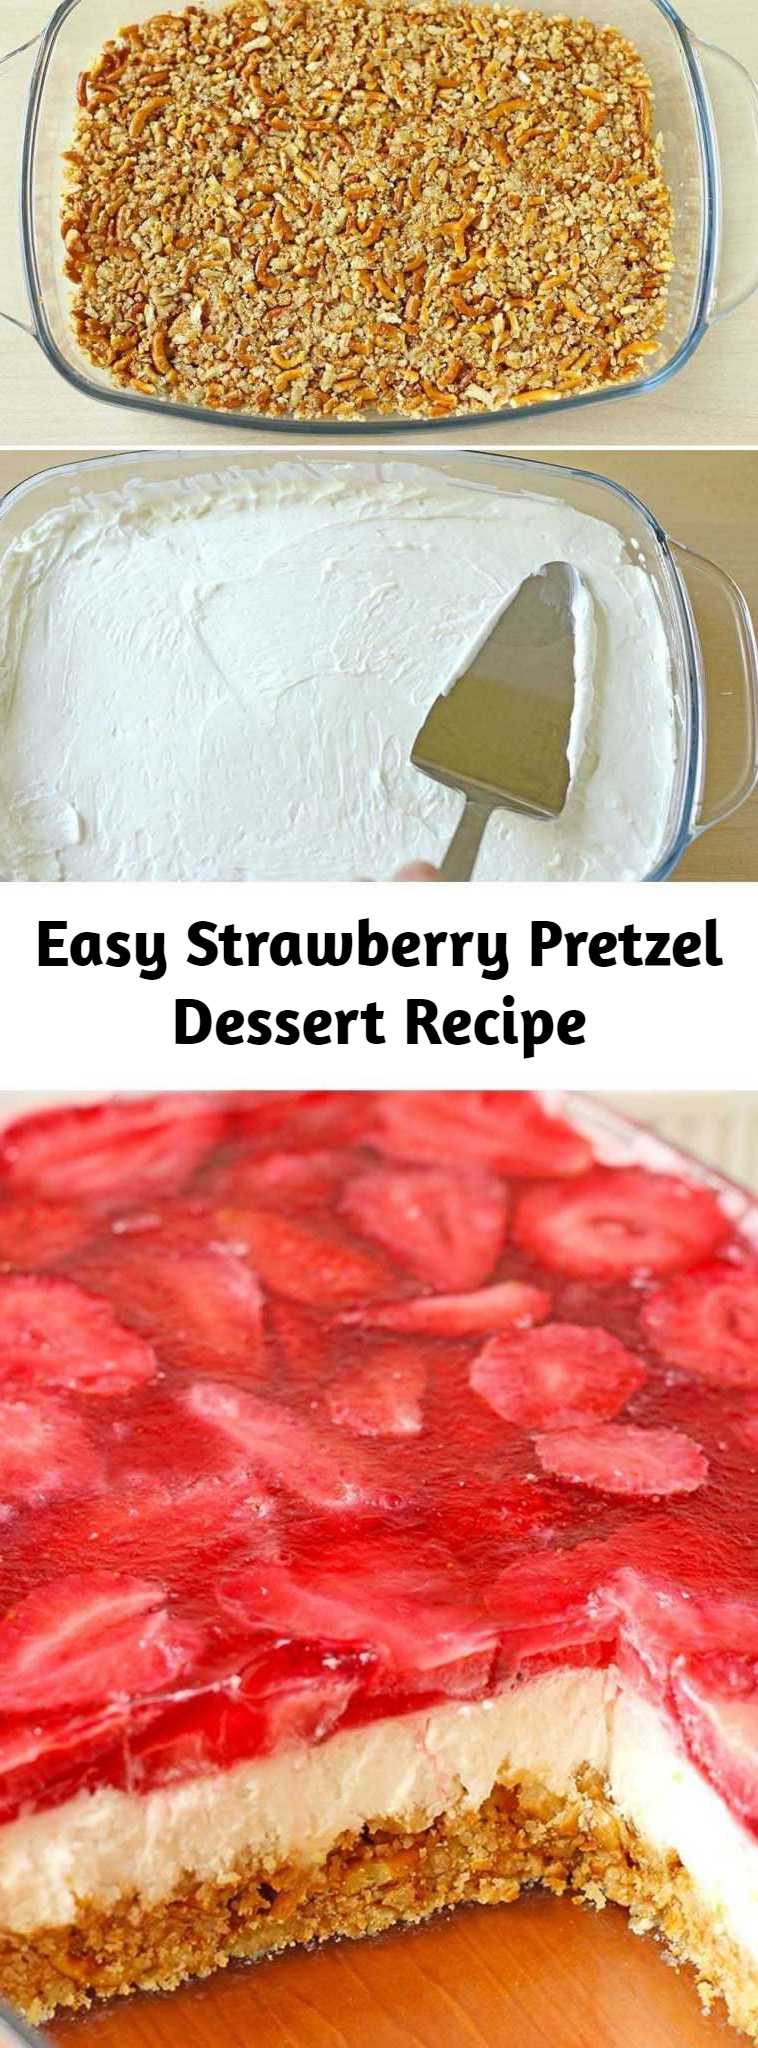 Easy Strawberry Pretzel Dessert Recipe - This Strawberry Pretzel Dessert just begging you to make it for your next summer picnic or bbq to serve. So, if you are big into sweet and salty desserts, you will not be able to stop eating this Strawberry Pretzel Dessert, because there’s “that” moment of silence where you put your spoon in and the world just stops because what you’re putting in your mouth is so amazing.